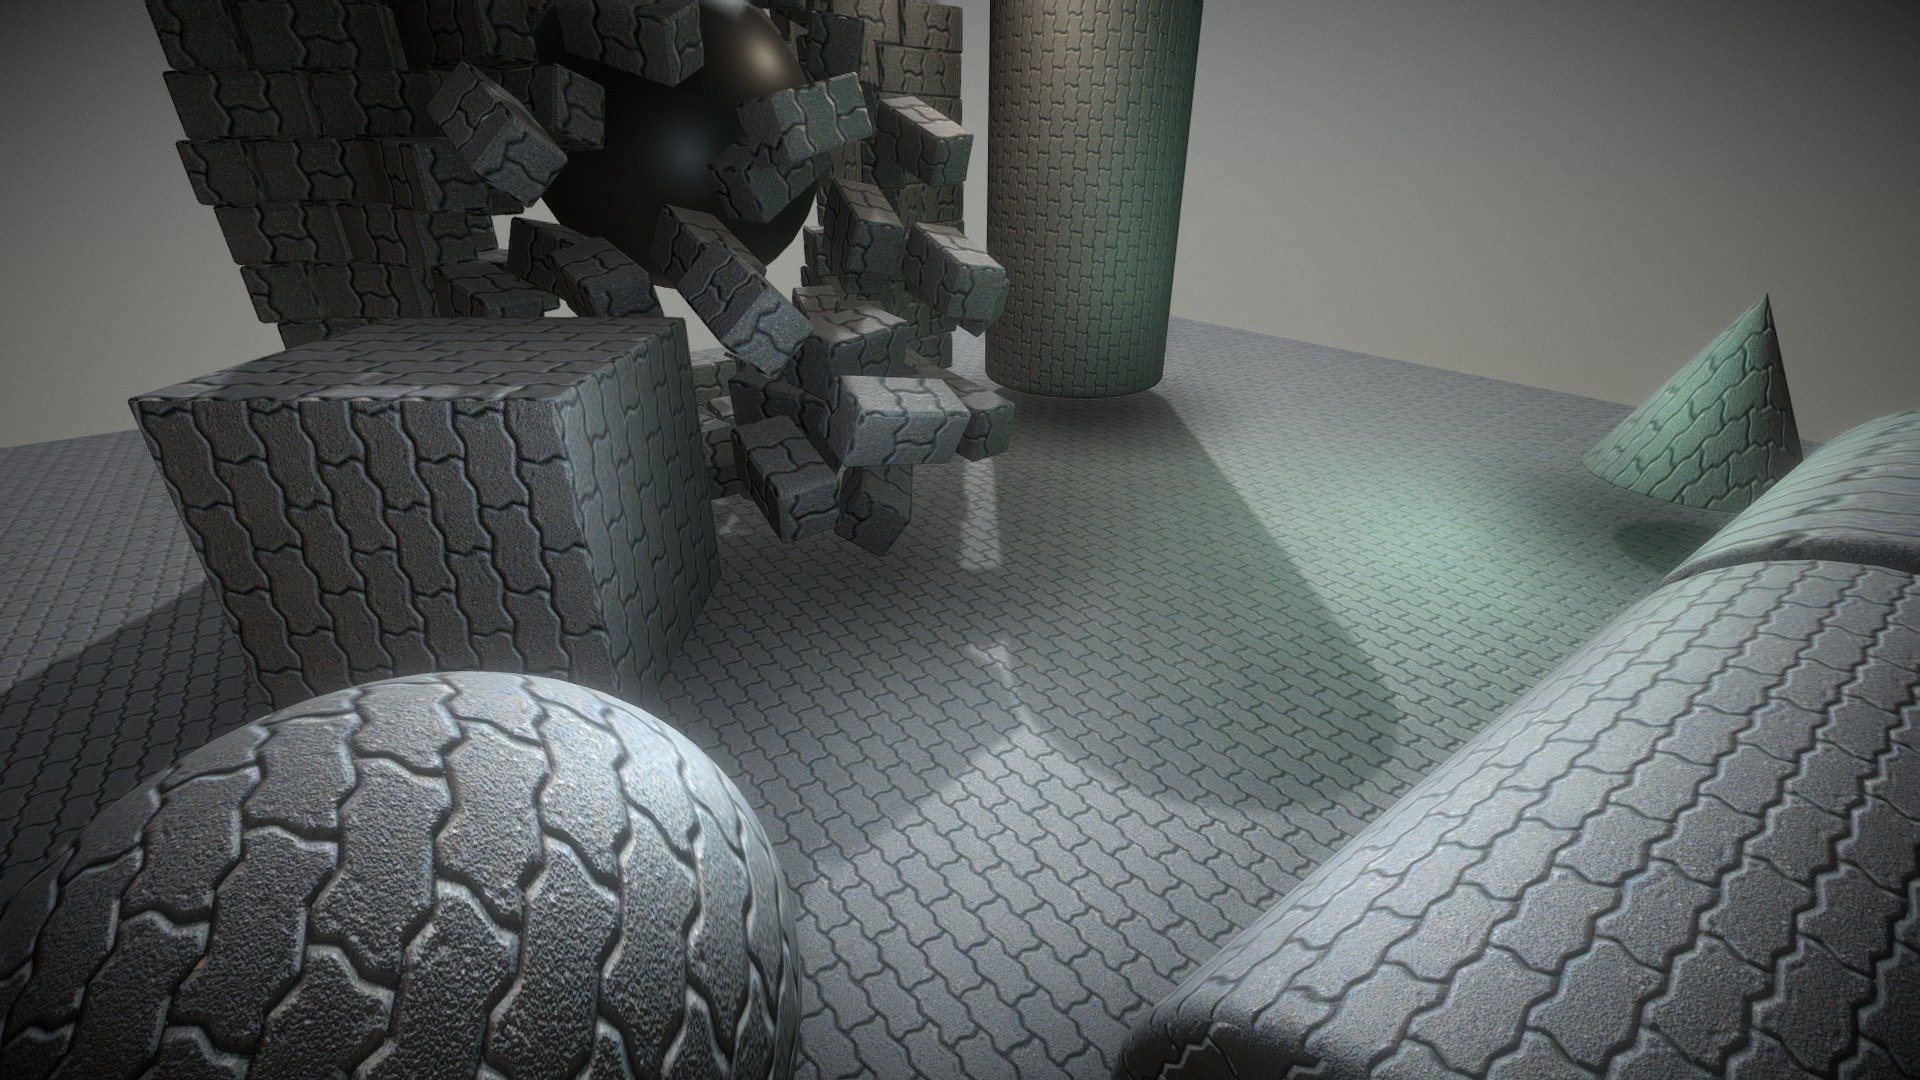 Here is another seamless and tileable texture-set for cobblestone.

 

 

 



Texture size 4k. 

Texture types included:




Colormap

Normalmap

Ao

Cavity

Photographed and later edited with Blender 3d model